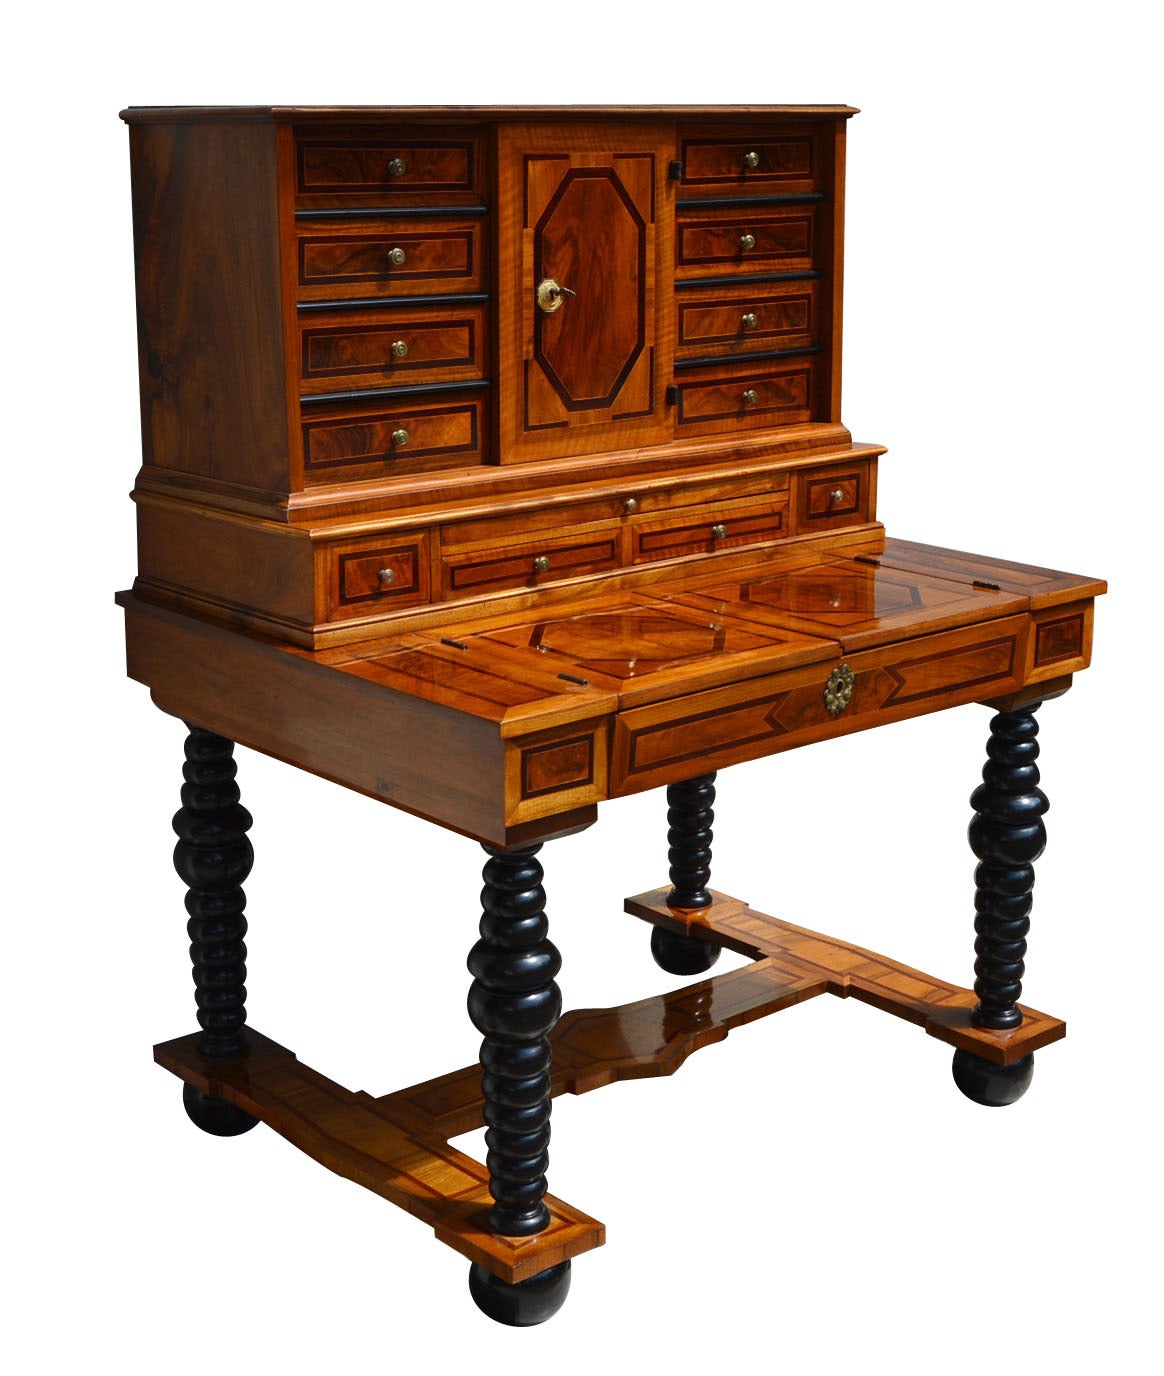 Baroque period tabernacle desk, Würzburg, 1790s. Made of walnut and other precious wood species (among them plum wood). 

Rare tablernacle desk of the highest quality. Ball feet, lathed ebonized legs. Multifunctional wiriting surface. Upper part